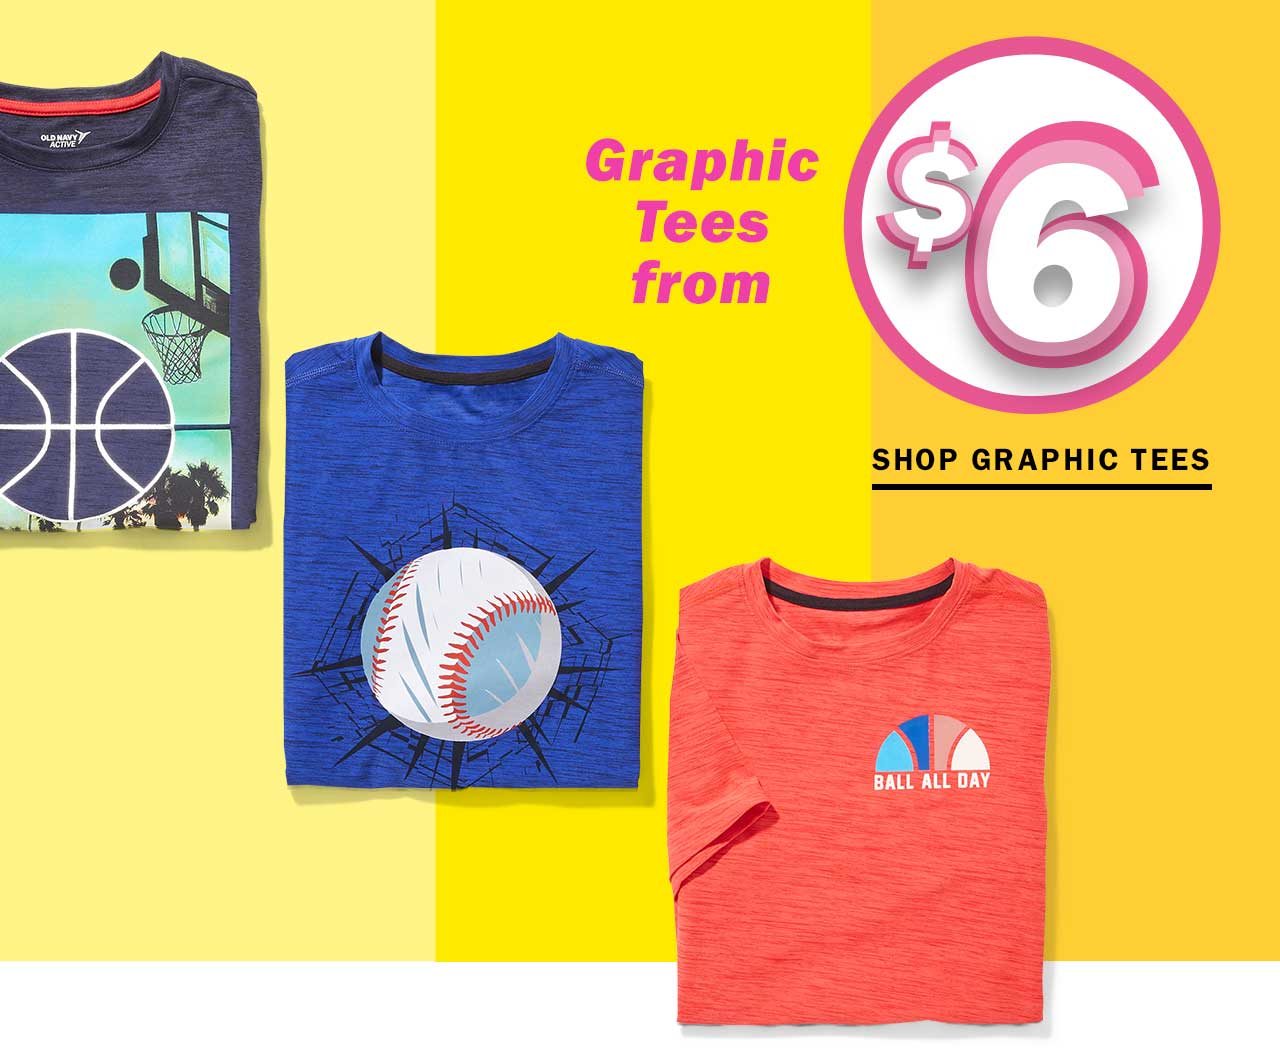 Graphic tees from $6